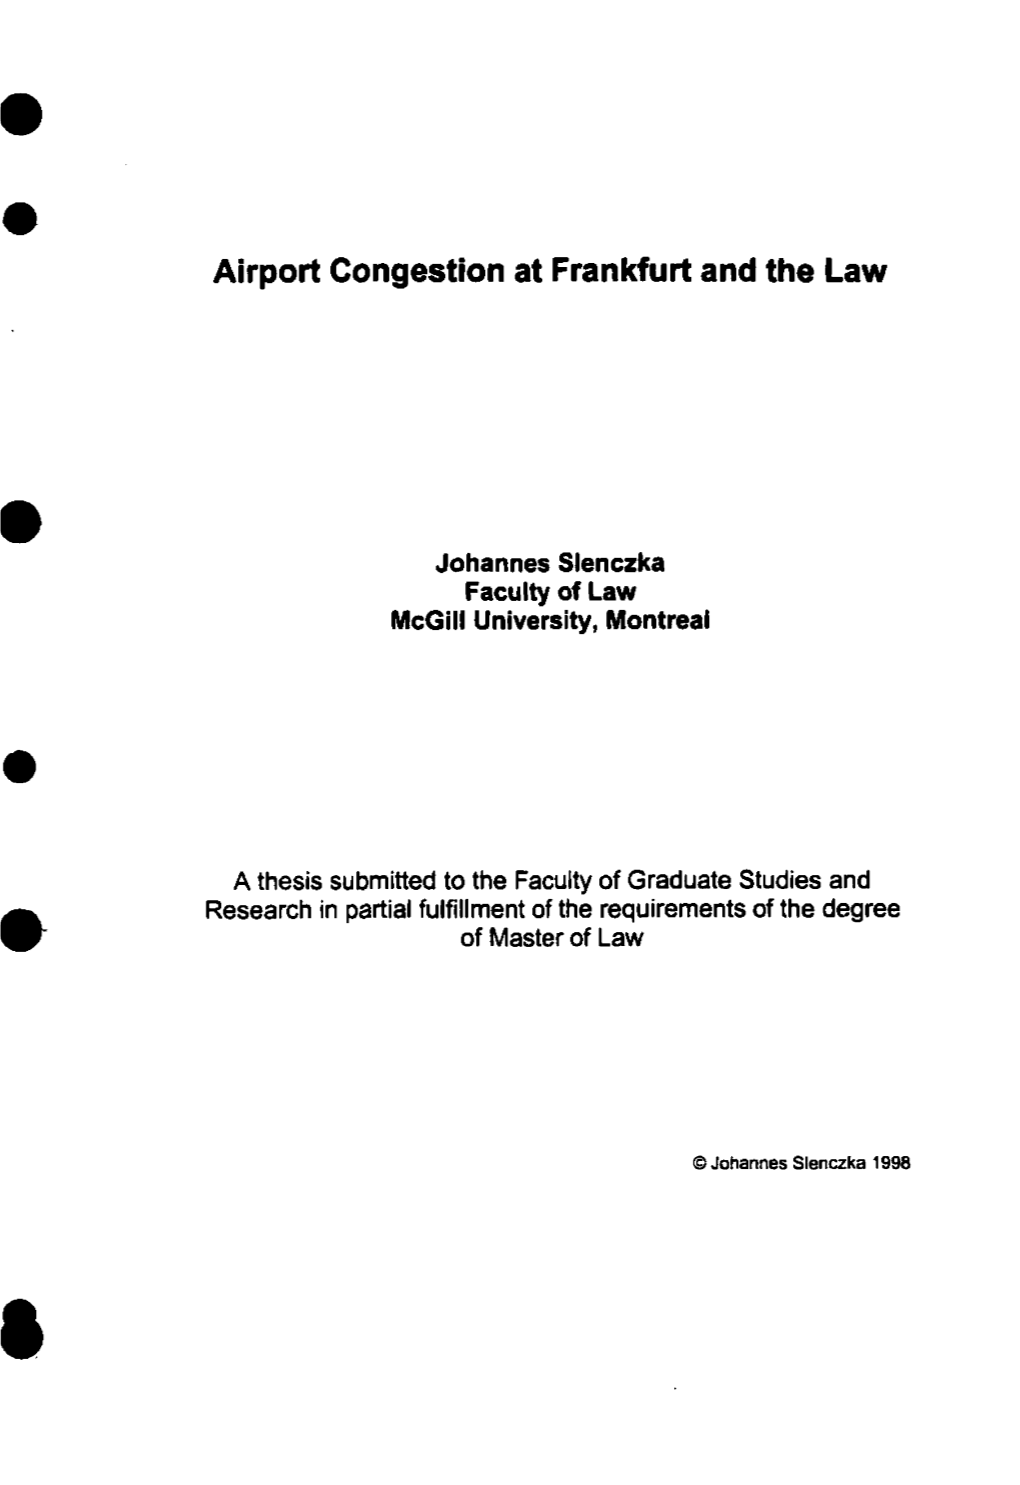 Airport Congestion at Frankfurt and the Law